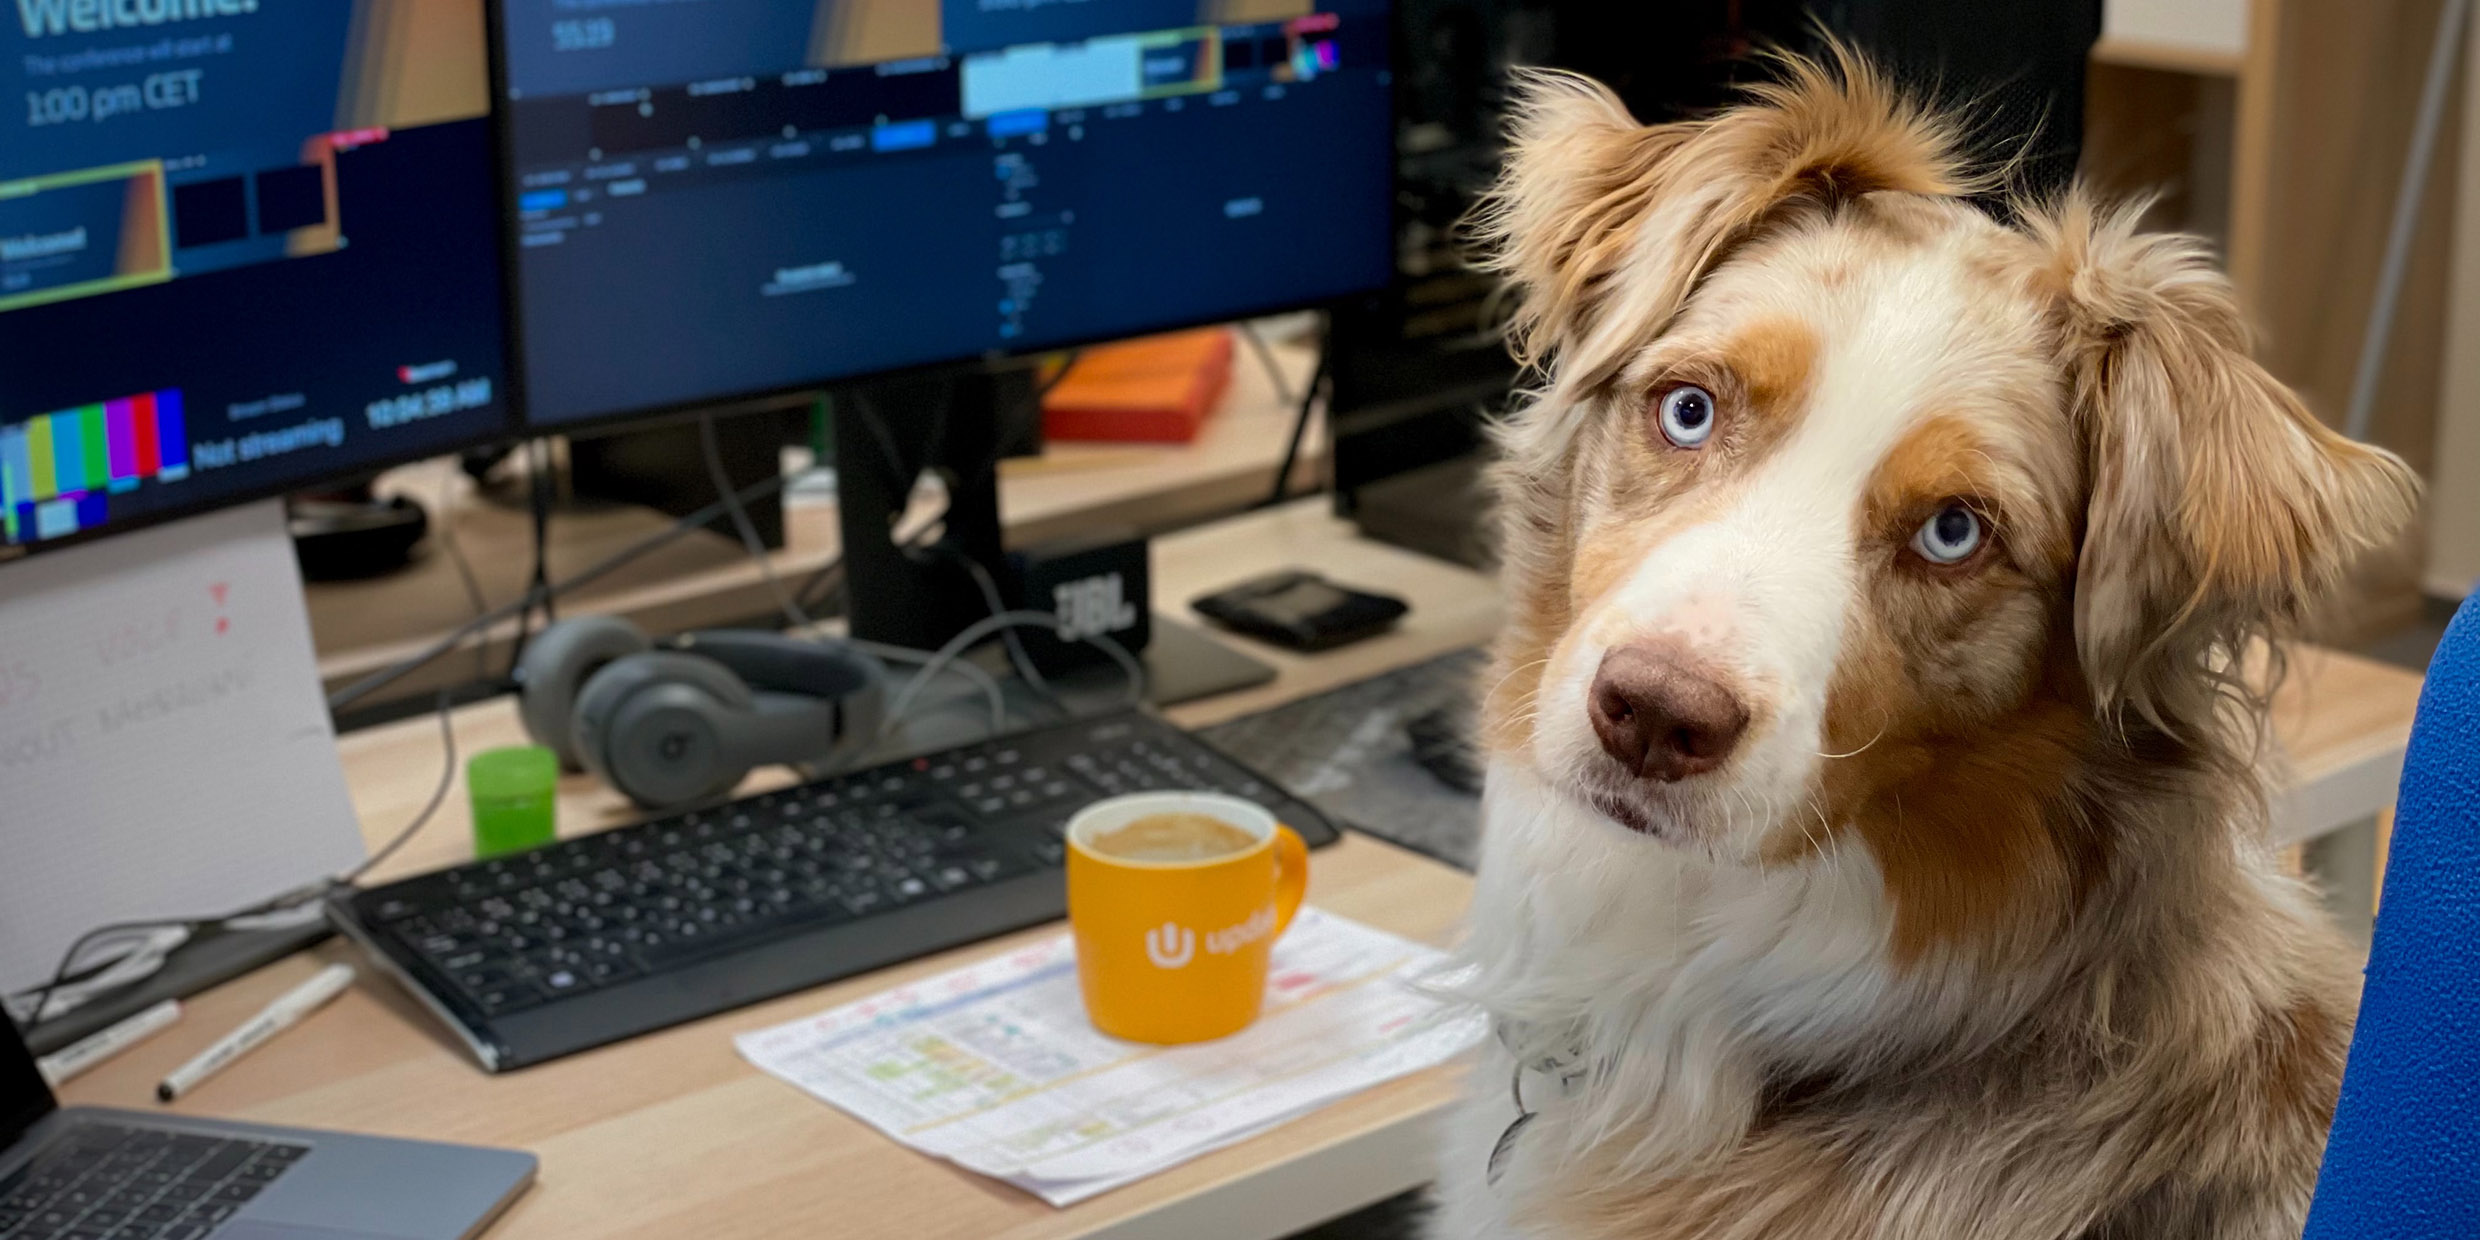 Image of a dog seated at a computer workstation